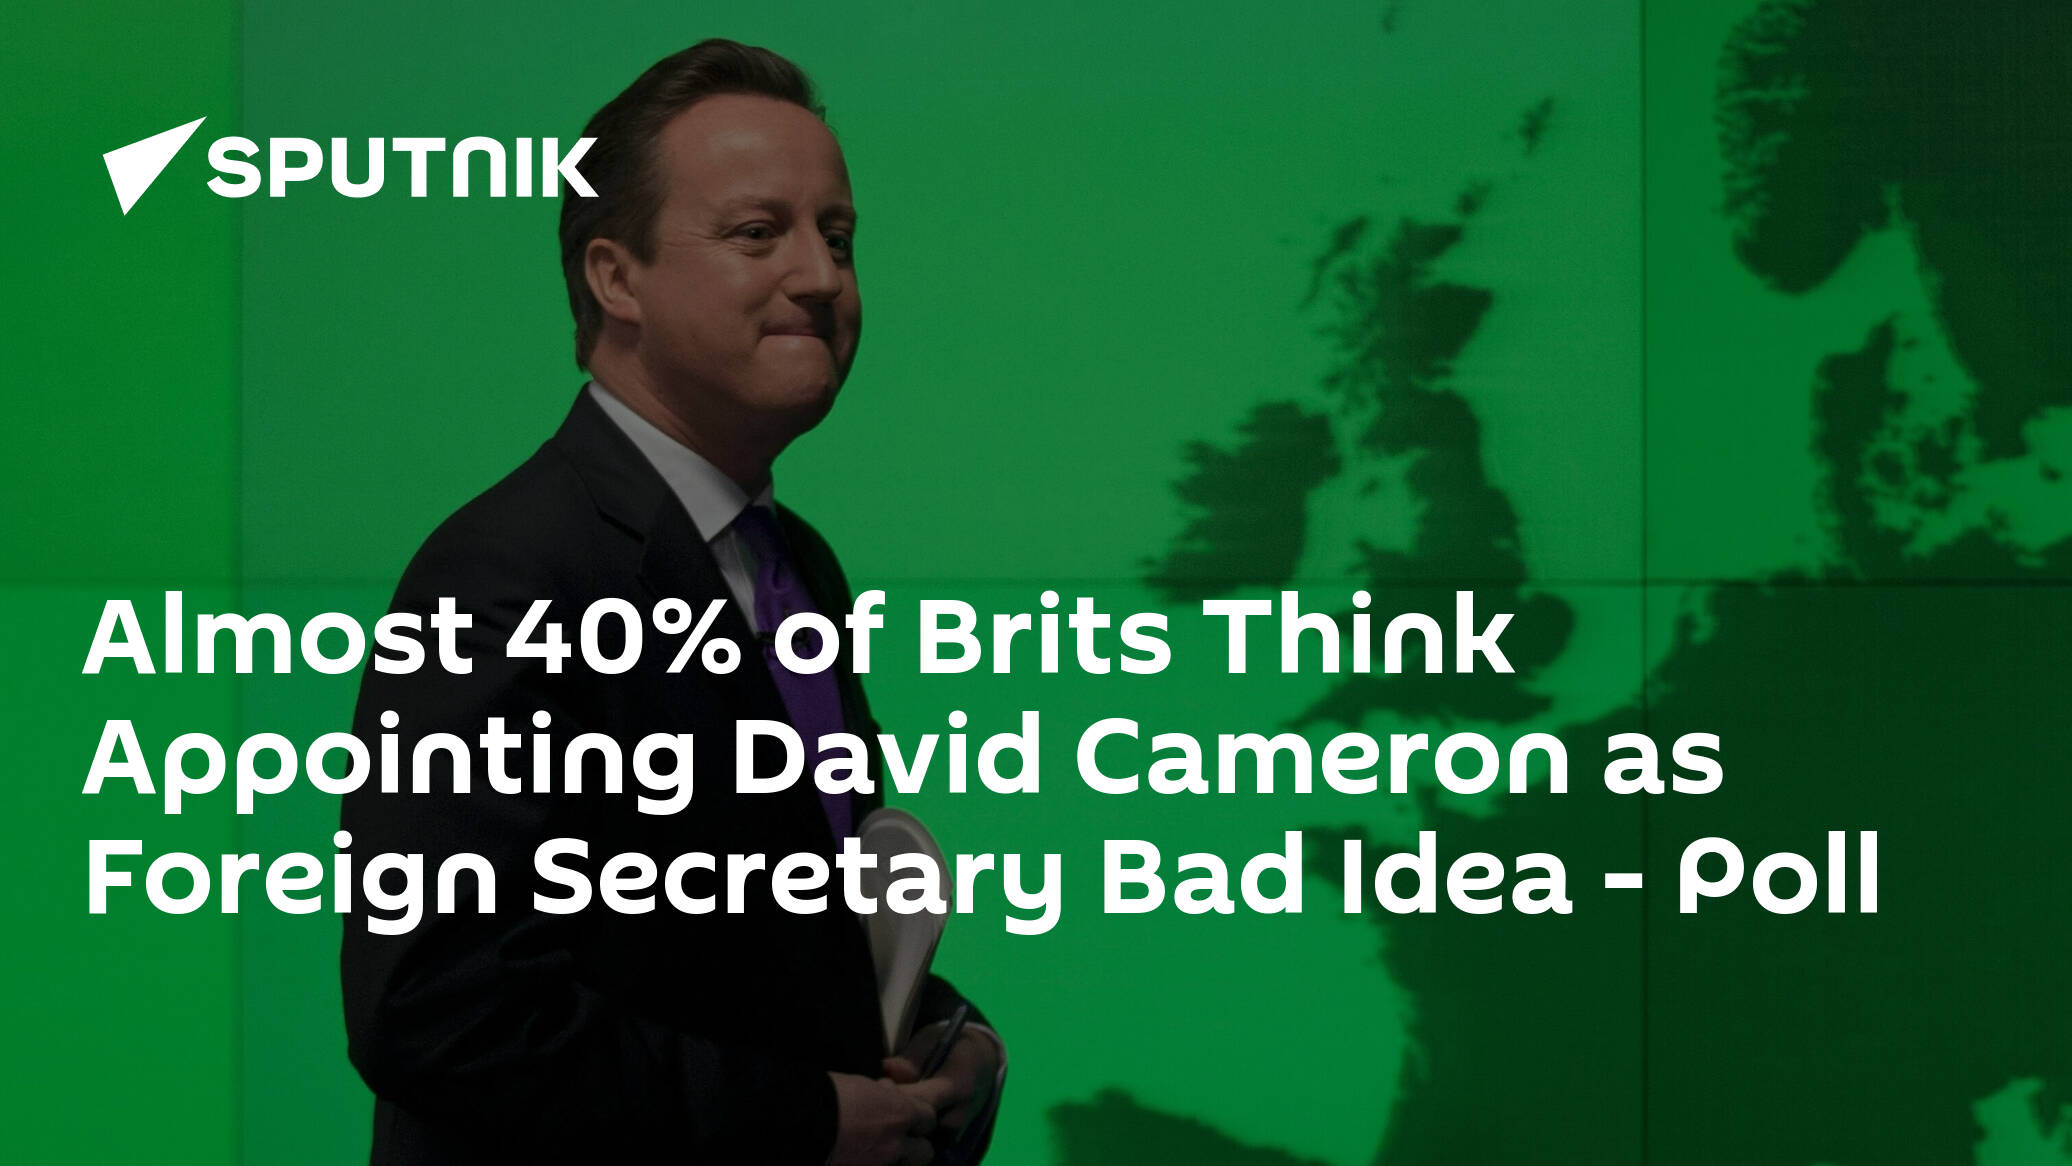 Almost 40% of Brits Think Appointing David Cameron as Foreign Secretary Bad Idea – Poll